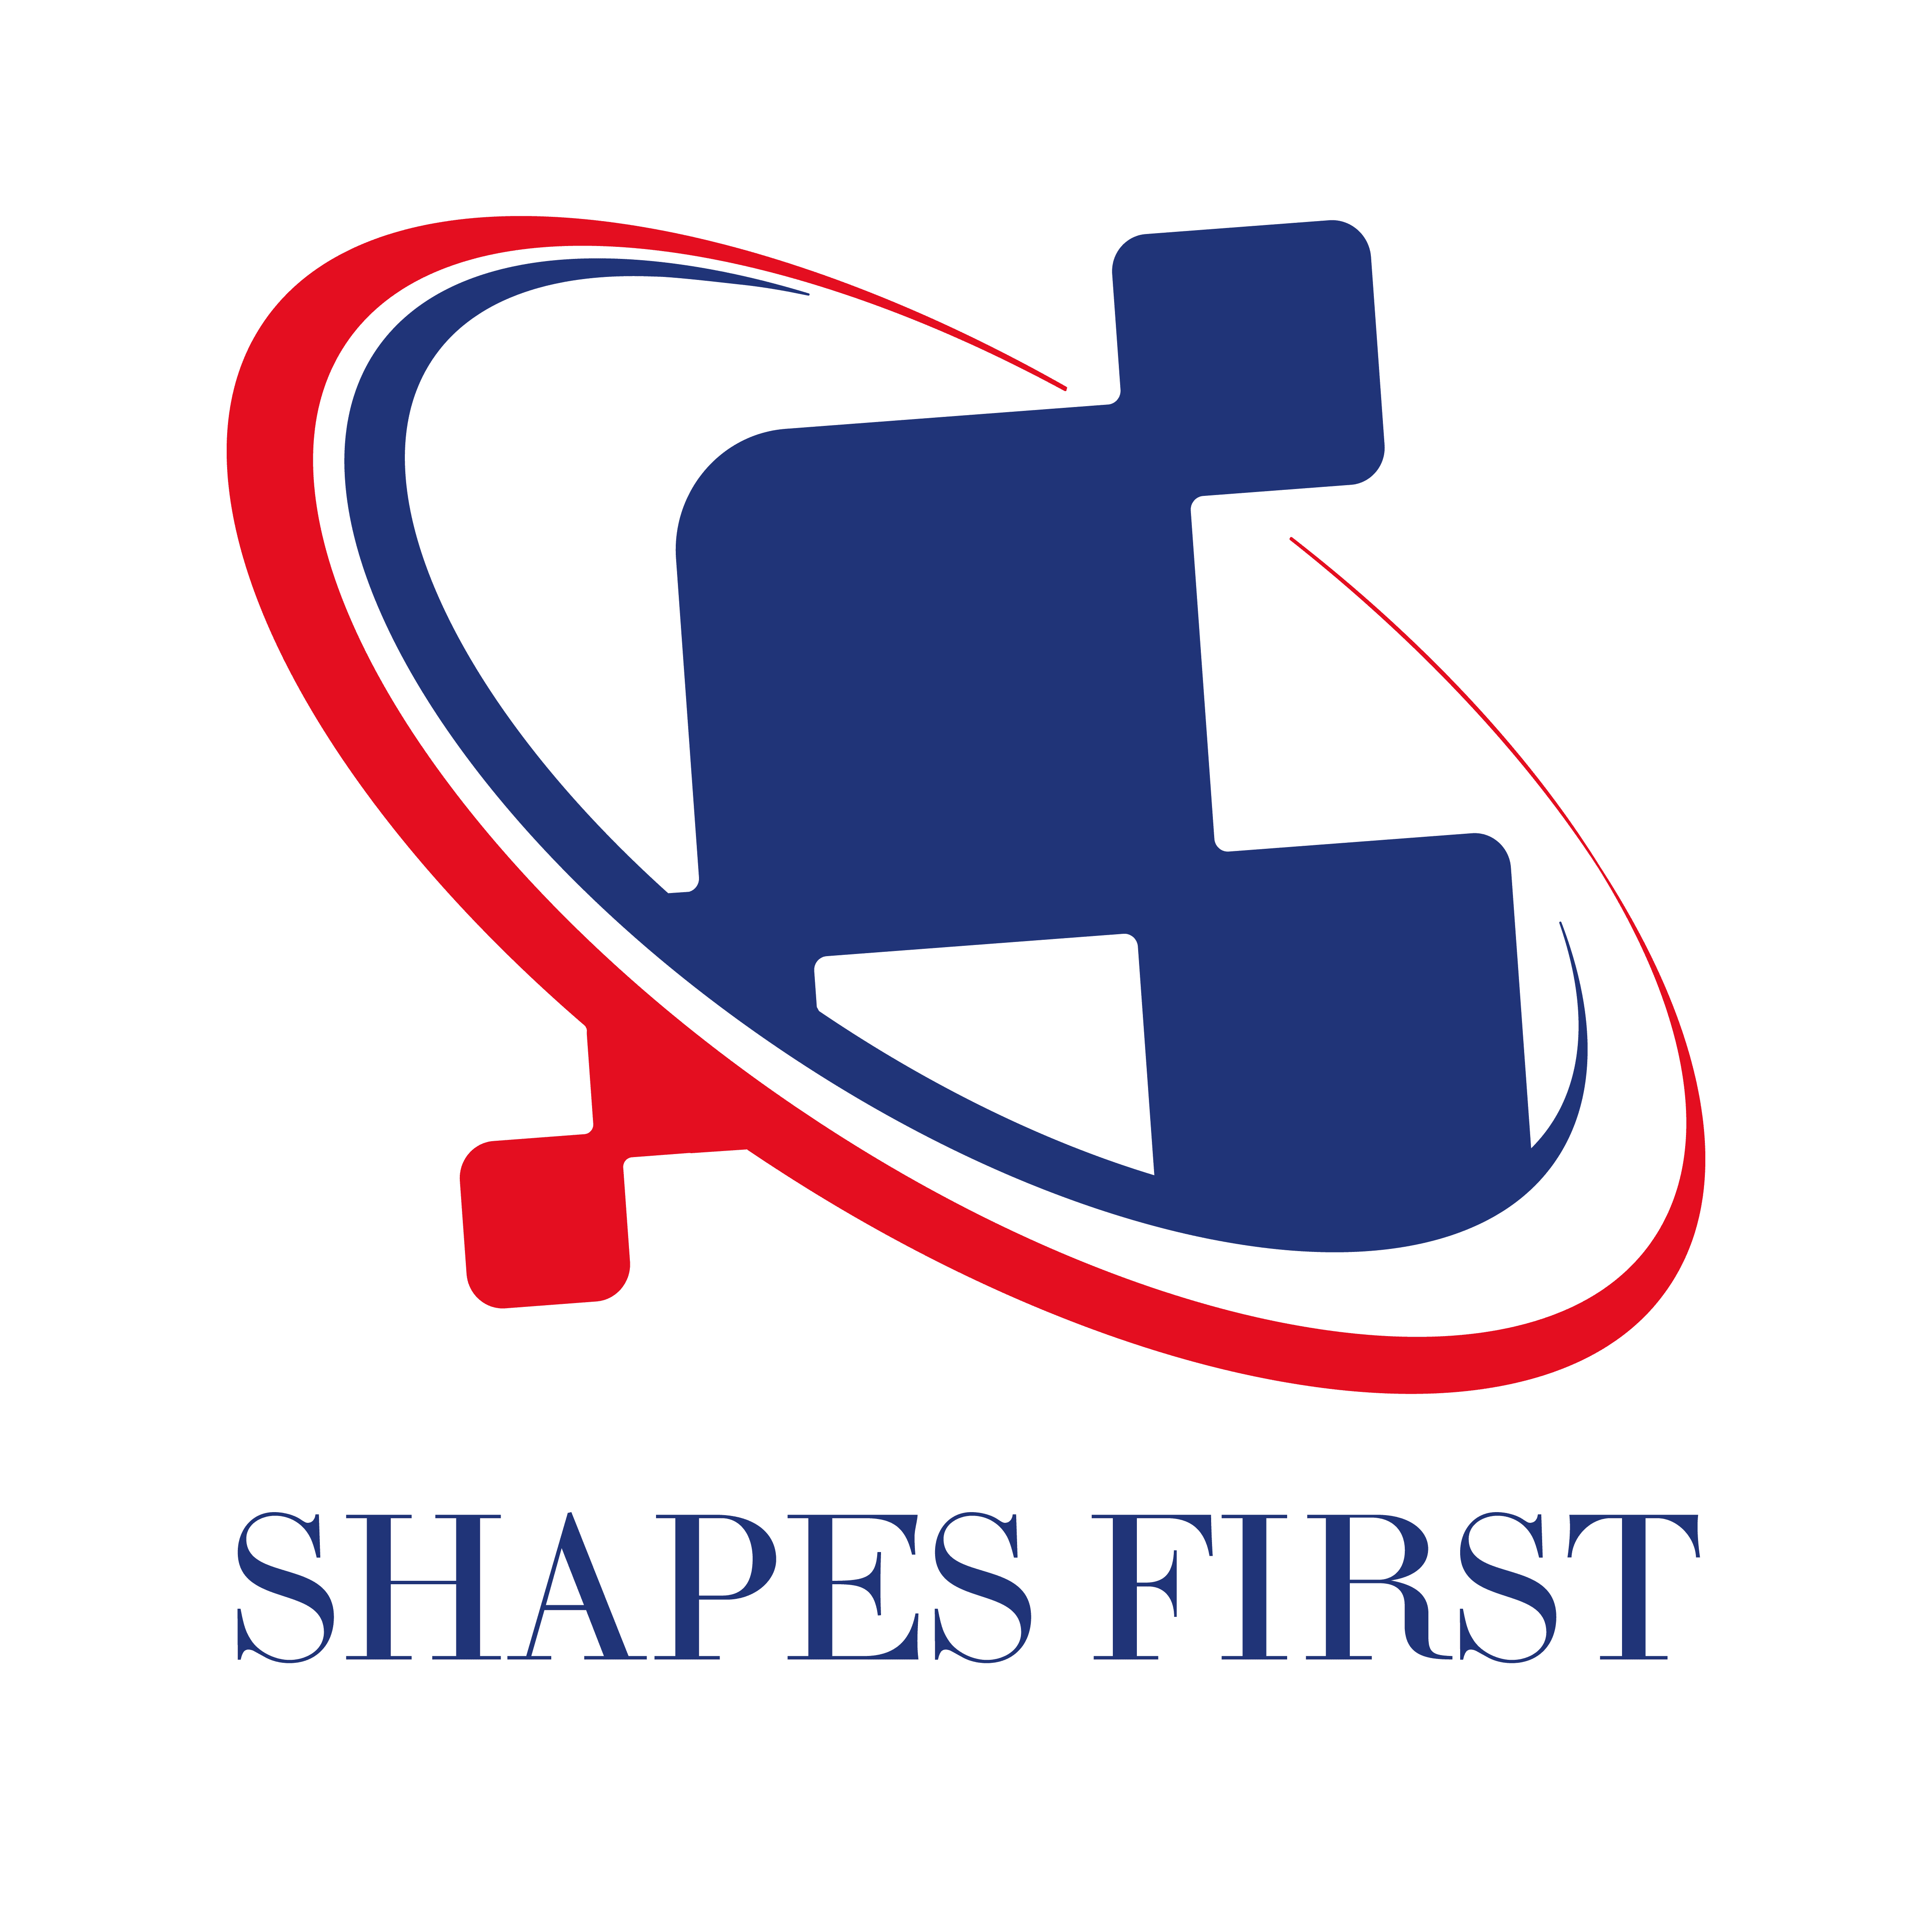 Shapes first logo